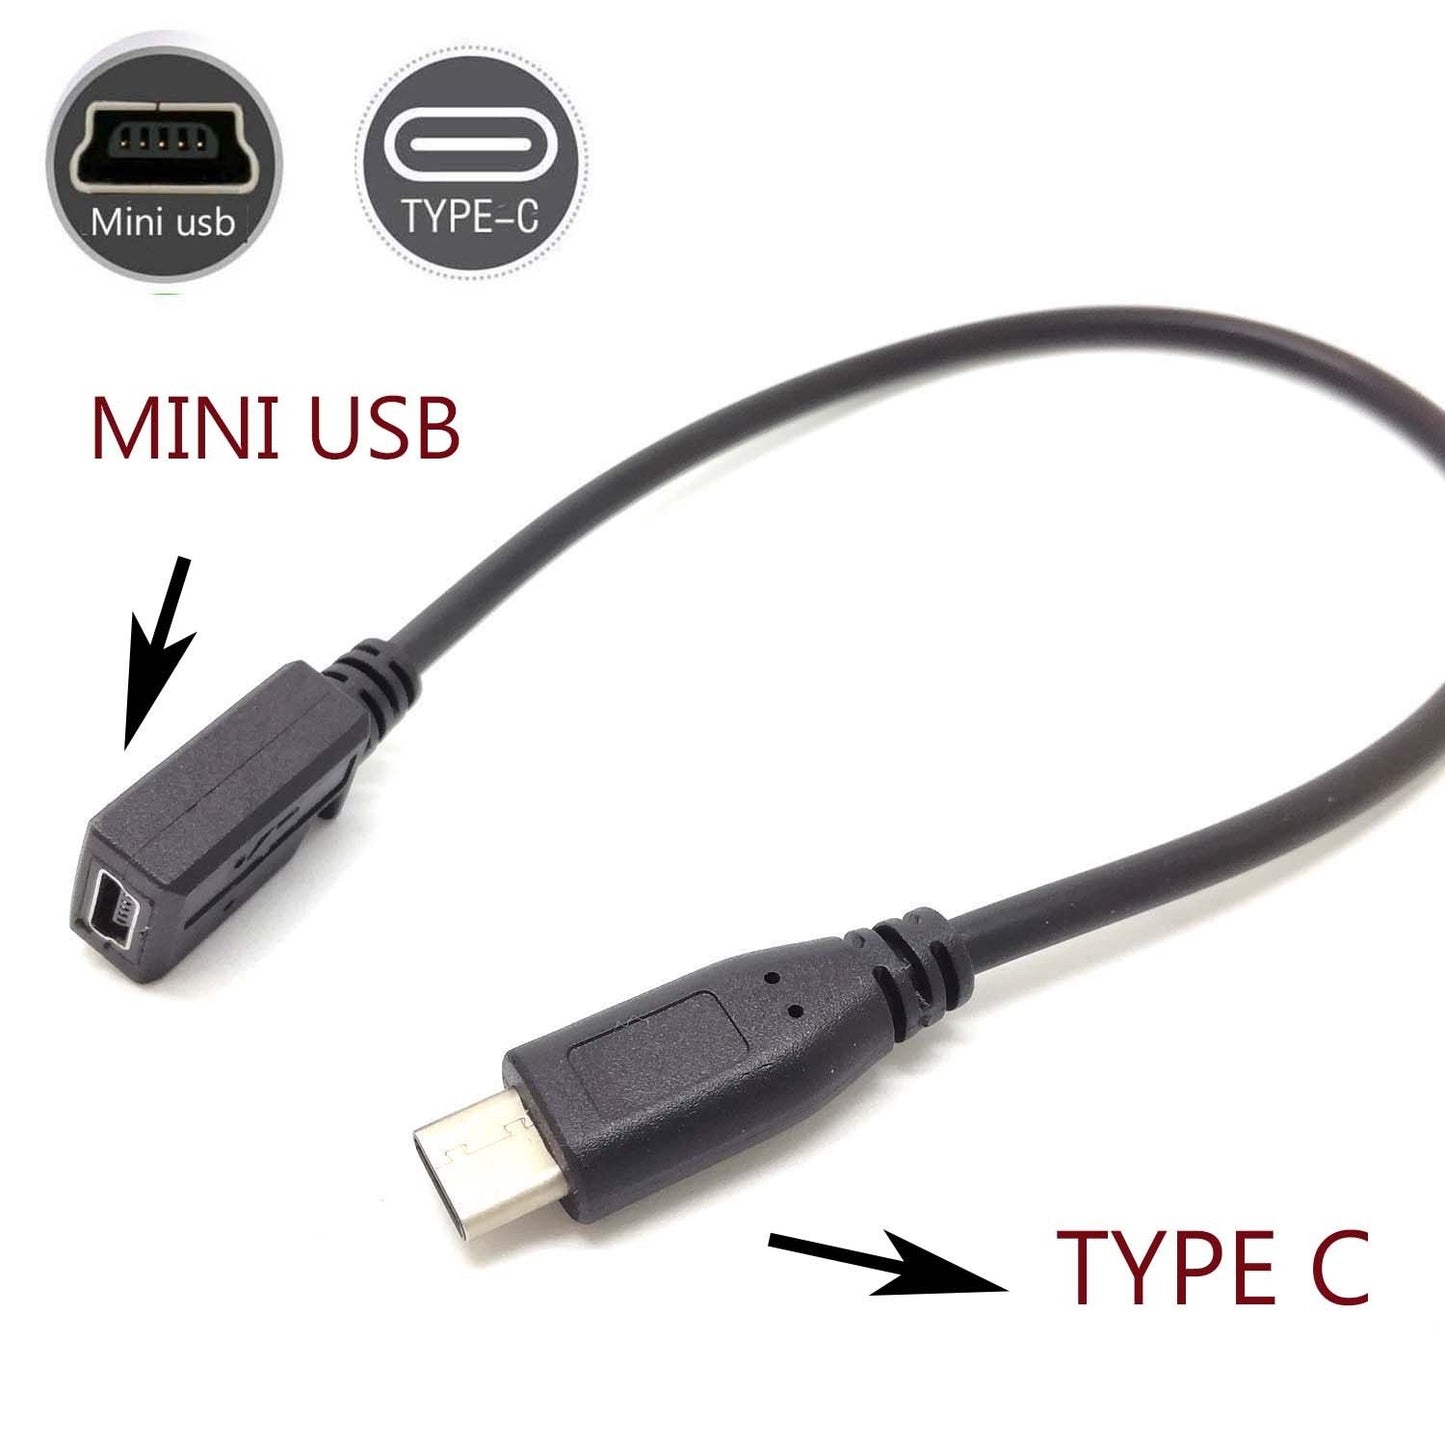 Type C USB 3.1 Male to 5pin Mini USB Female Charging Data sync Cable Cord Adapter